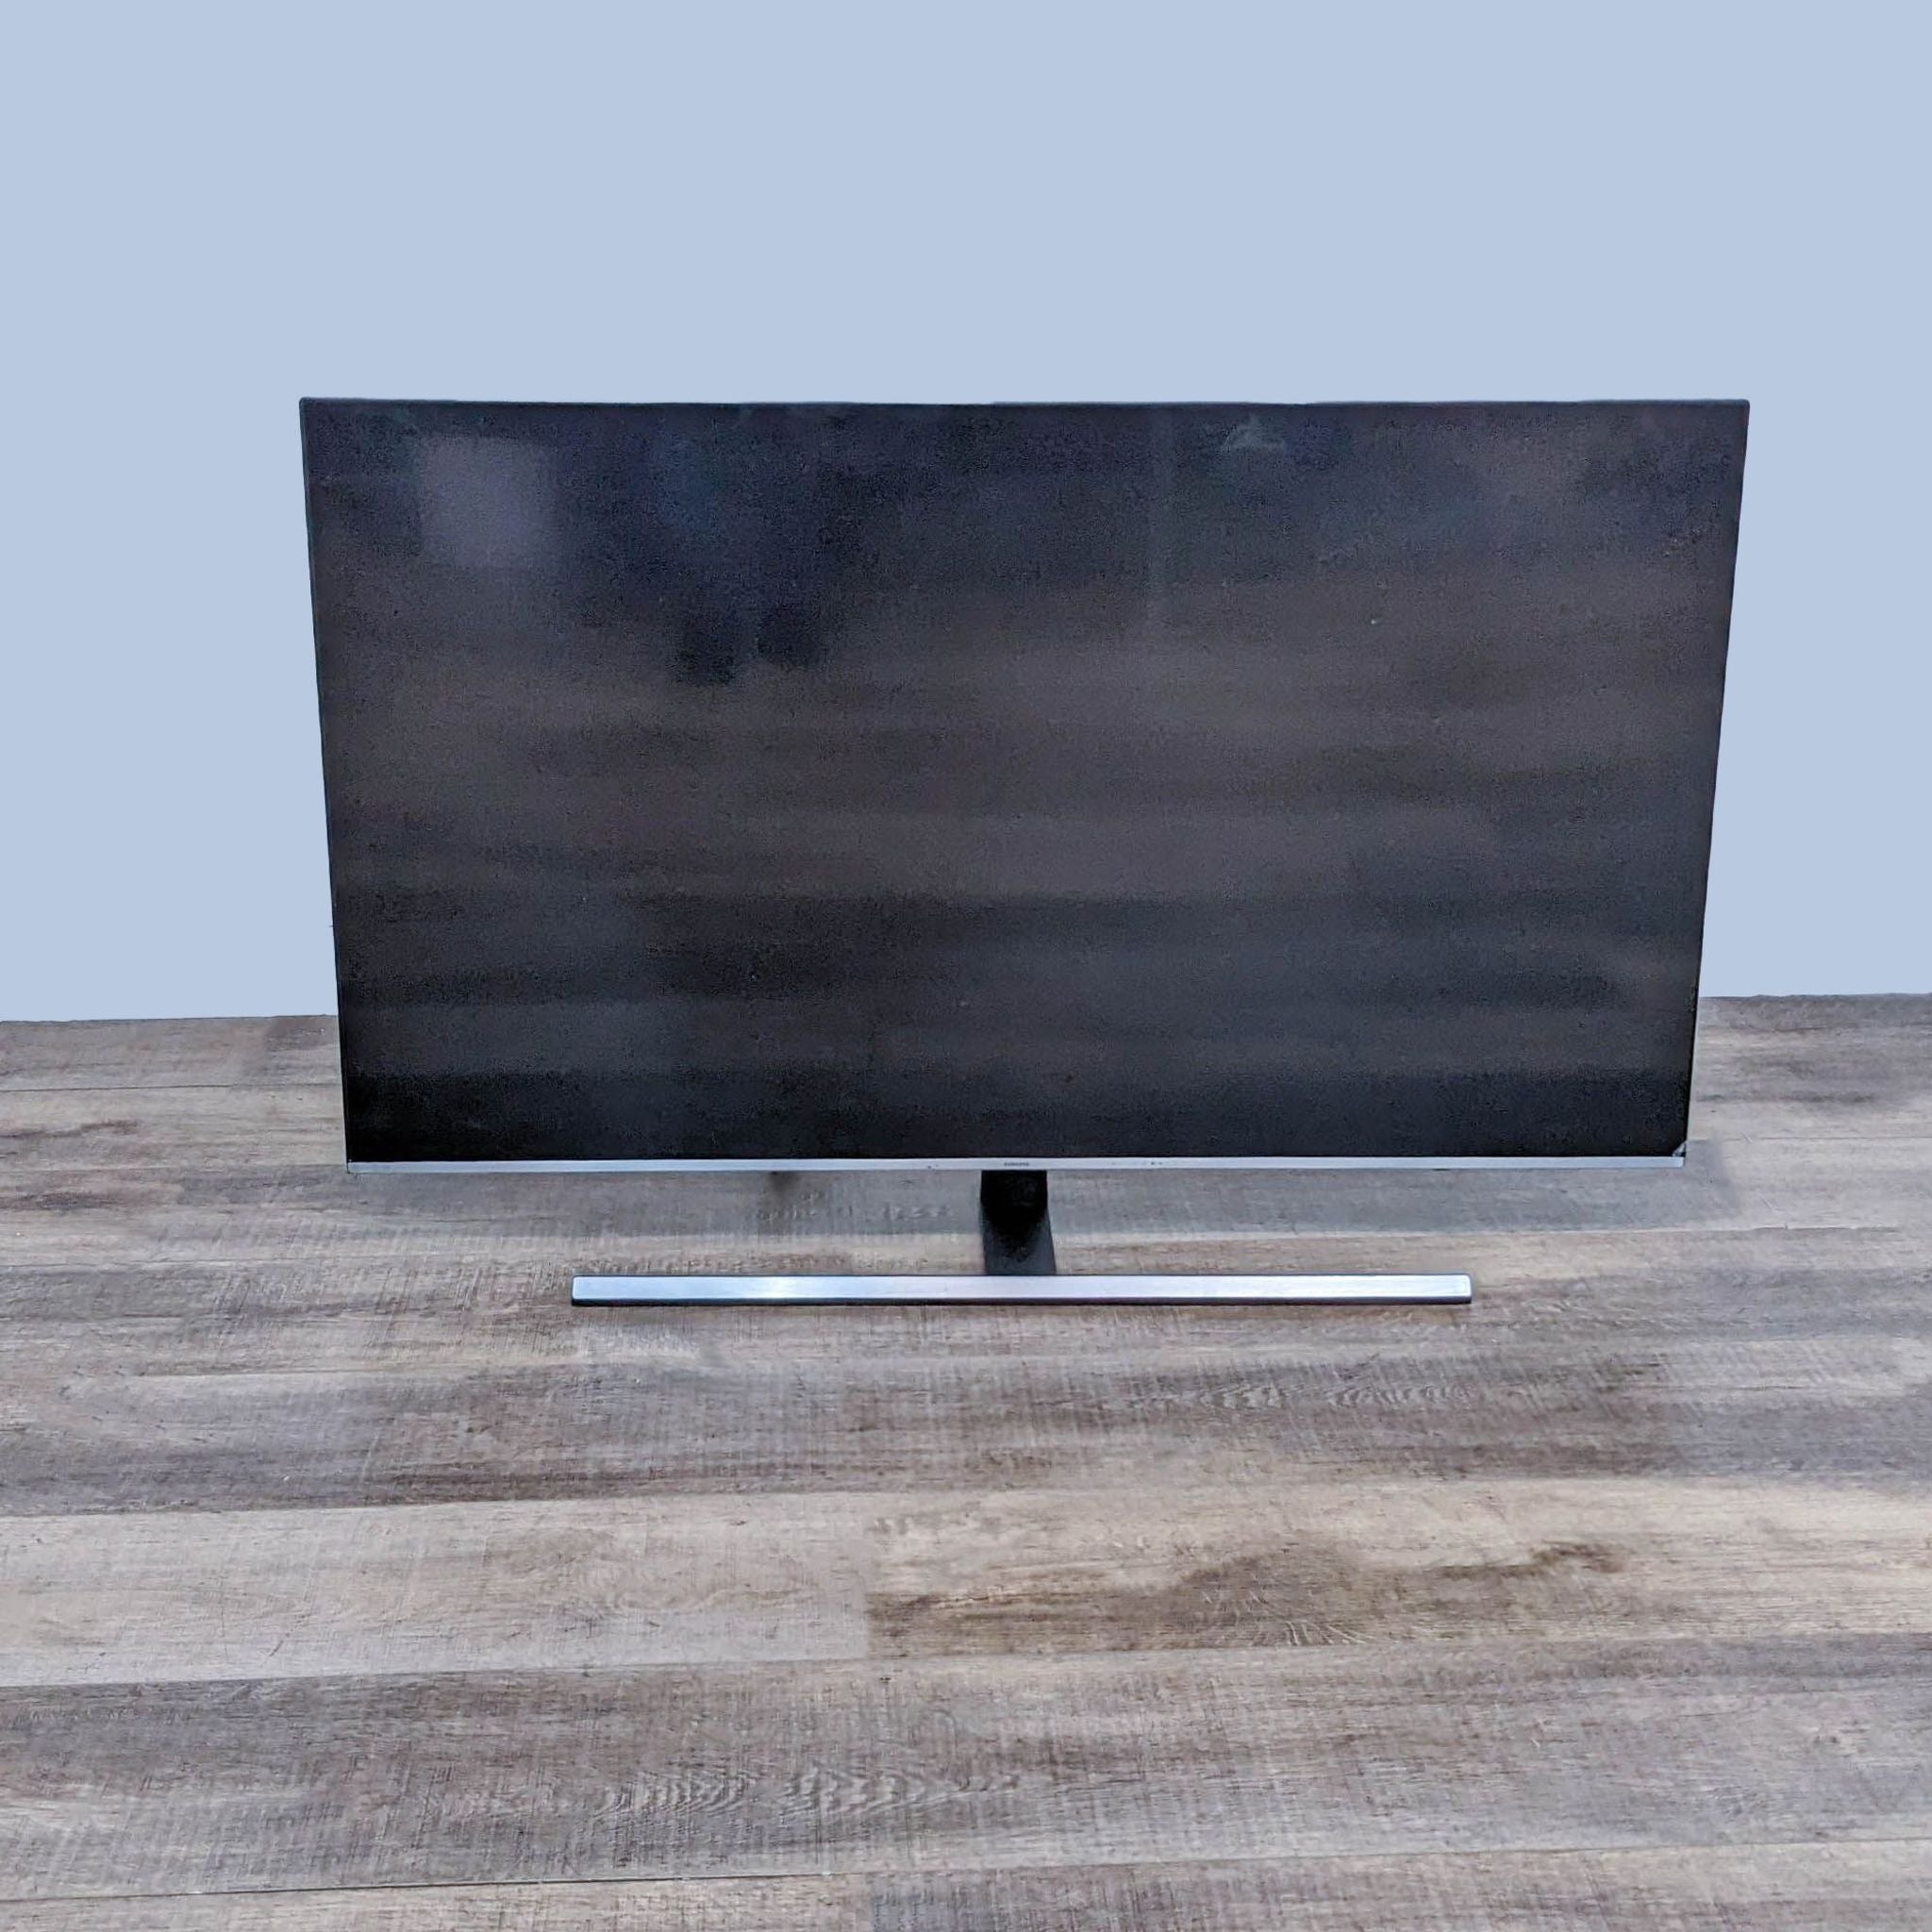 Samsung UN55NU8000F edge-lit LED TV turned off, showcasing its sleek design on a wooden surface.